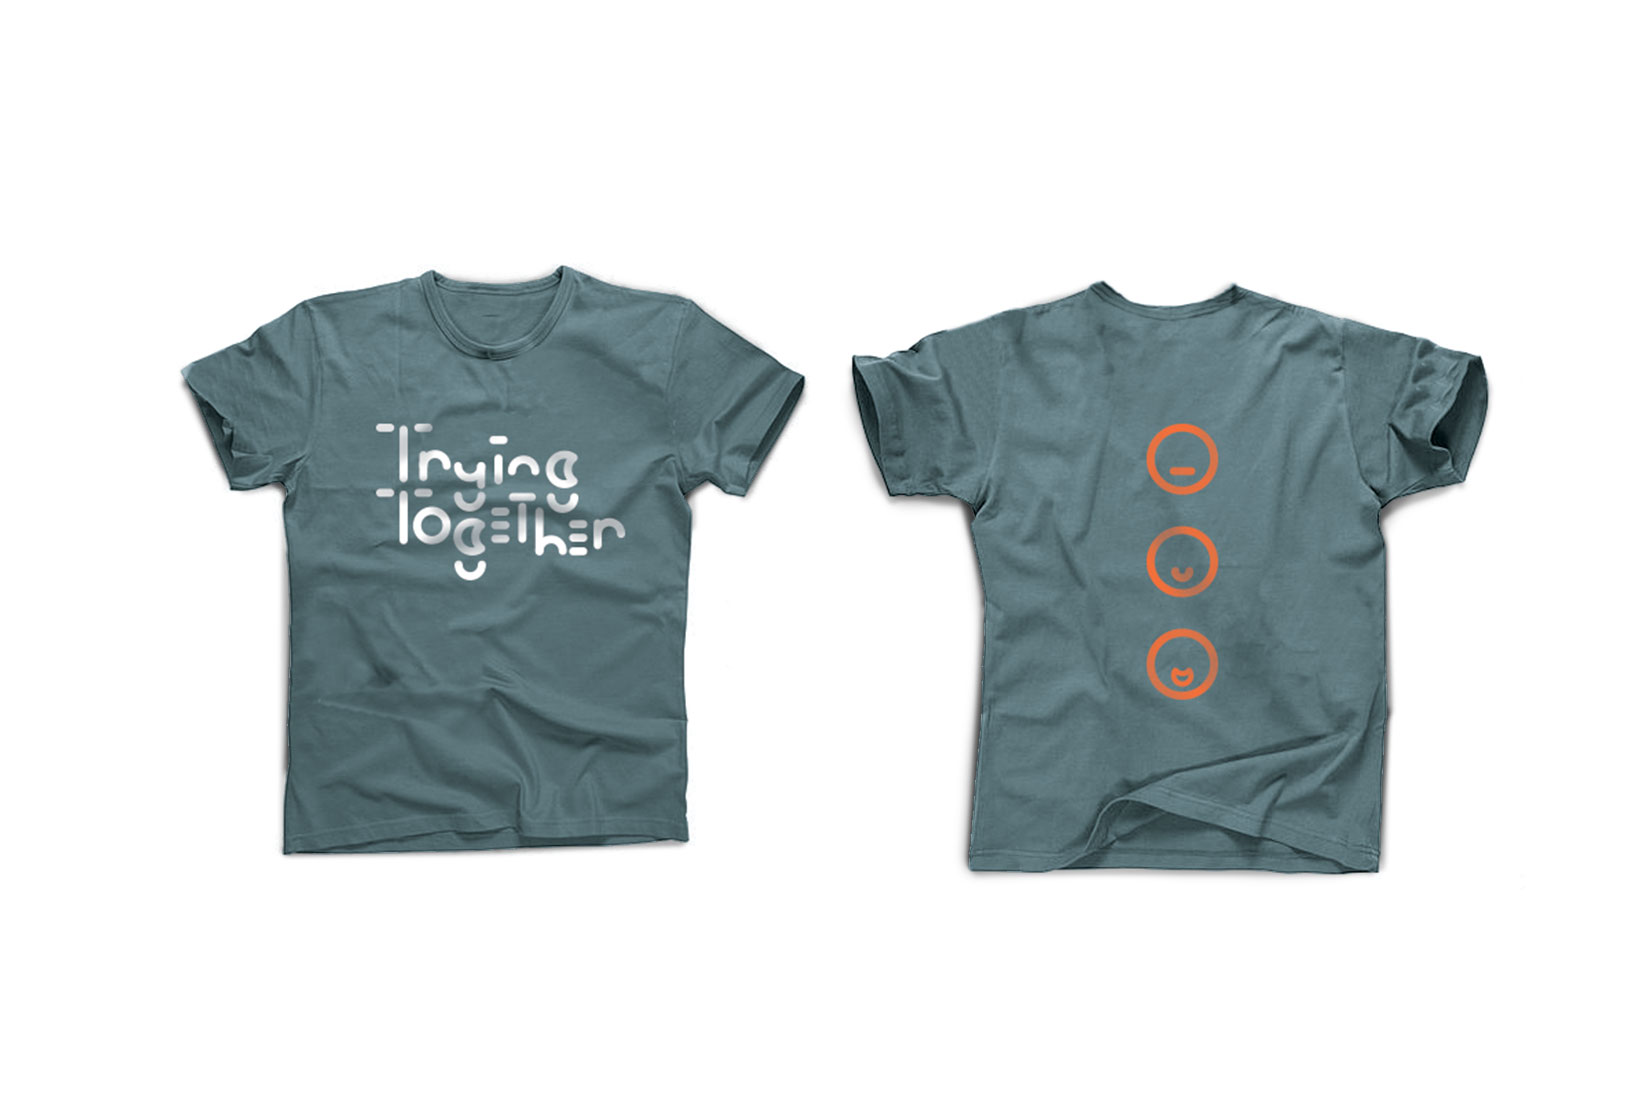 Trying Together front and back of t-shirt